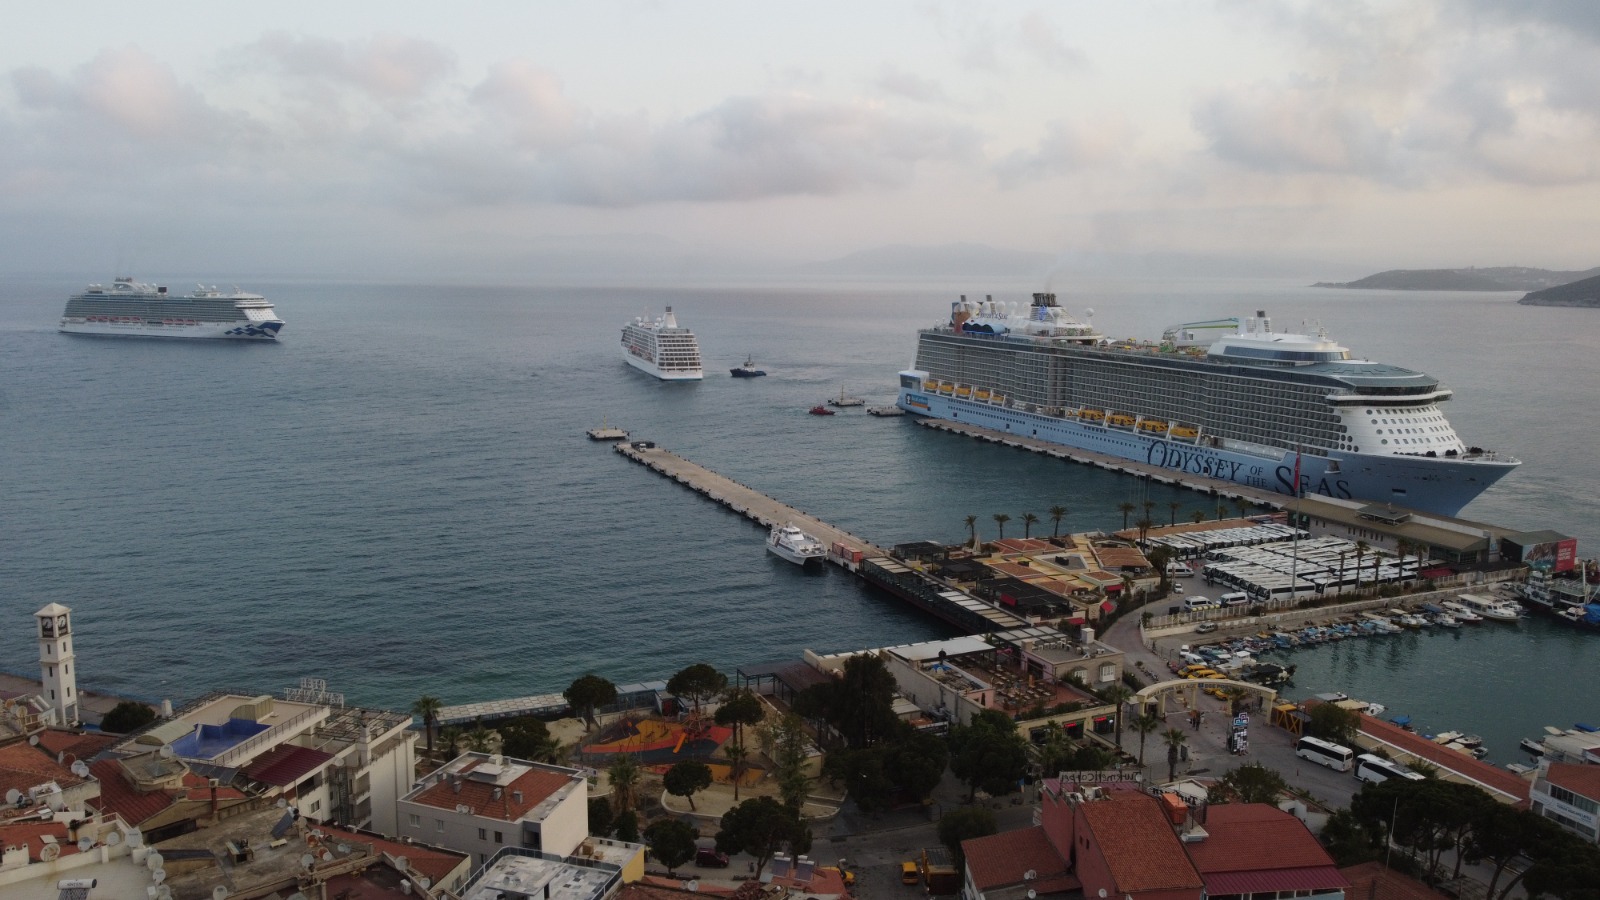 Ege Port Kusadasi Hosted The Largest Cruise Ship To Come To Turkey